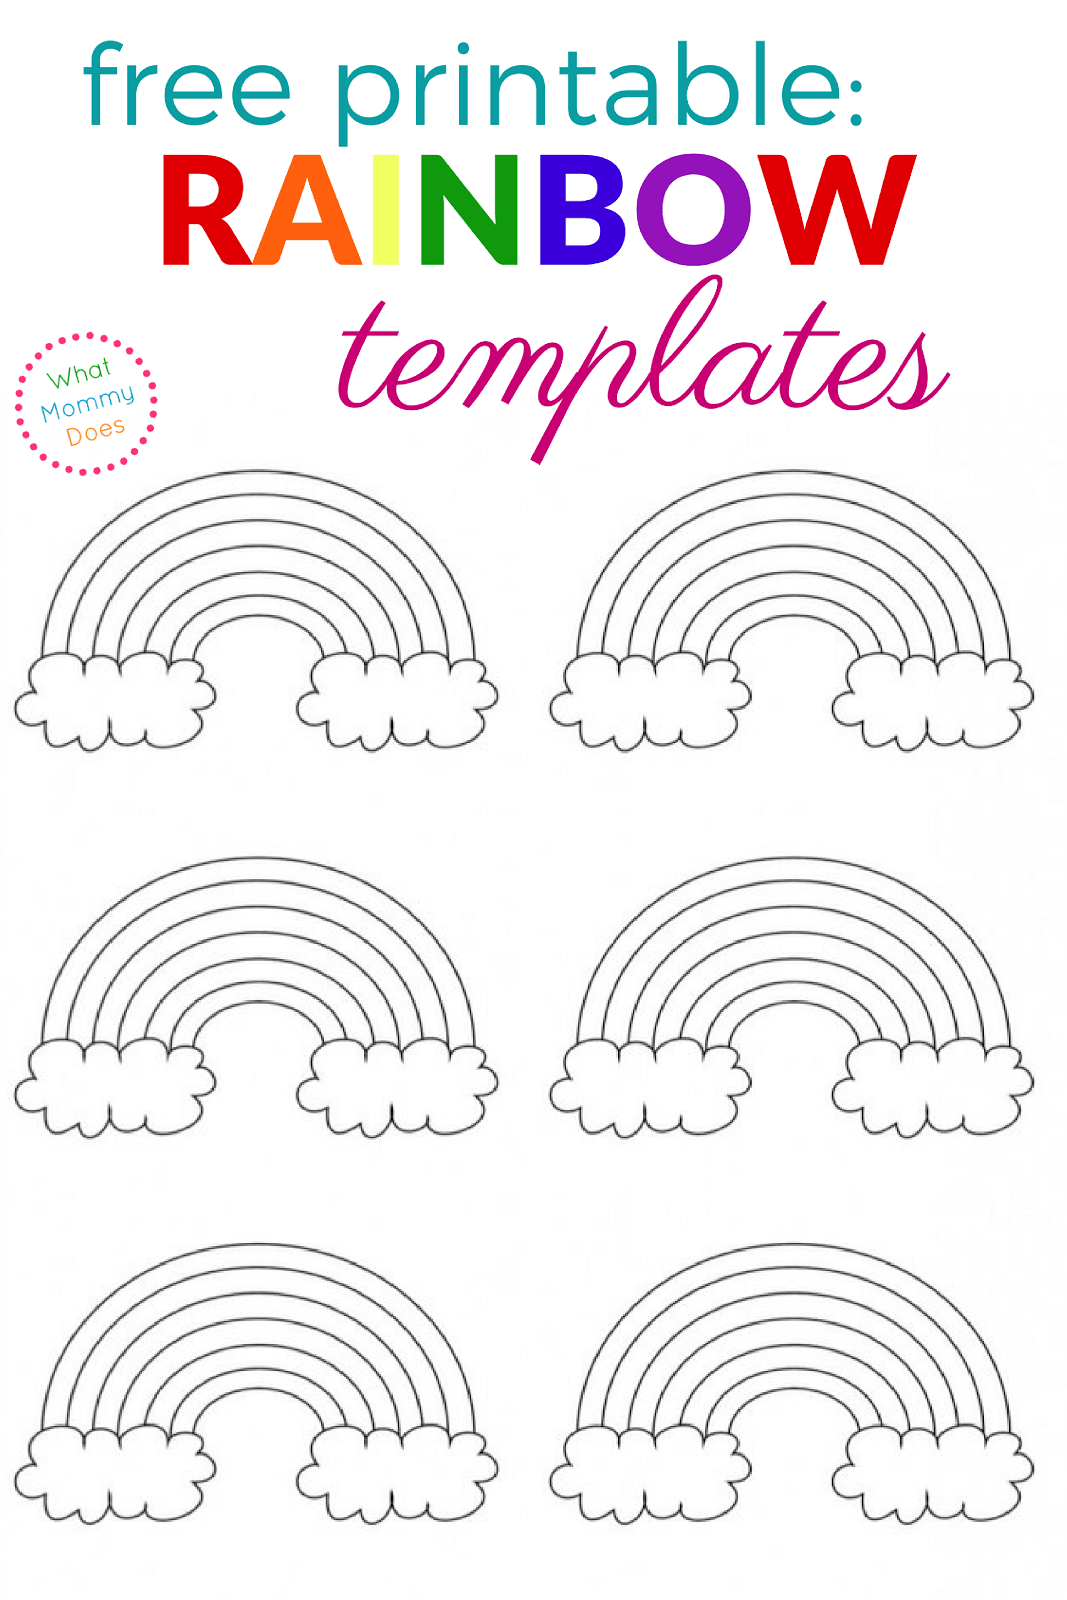 Free Templates To Print For Kids